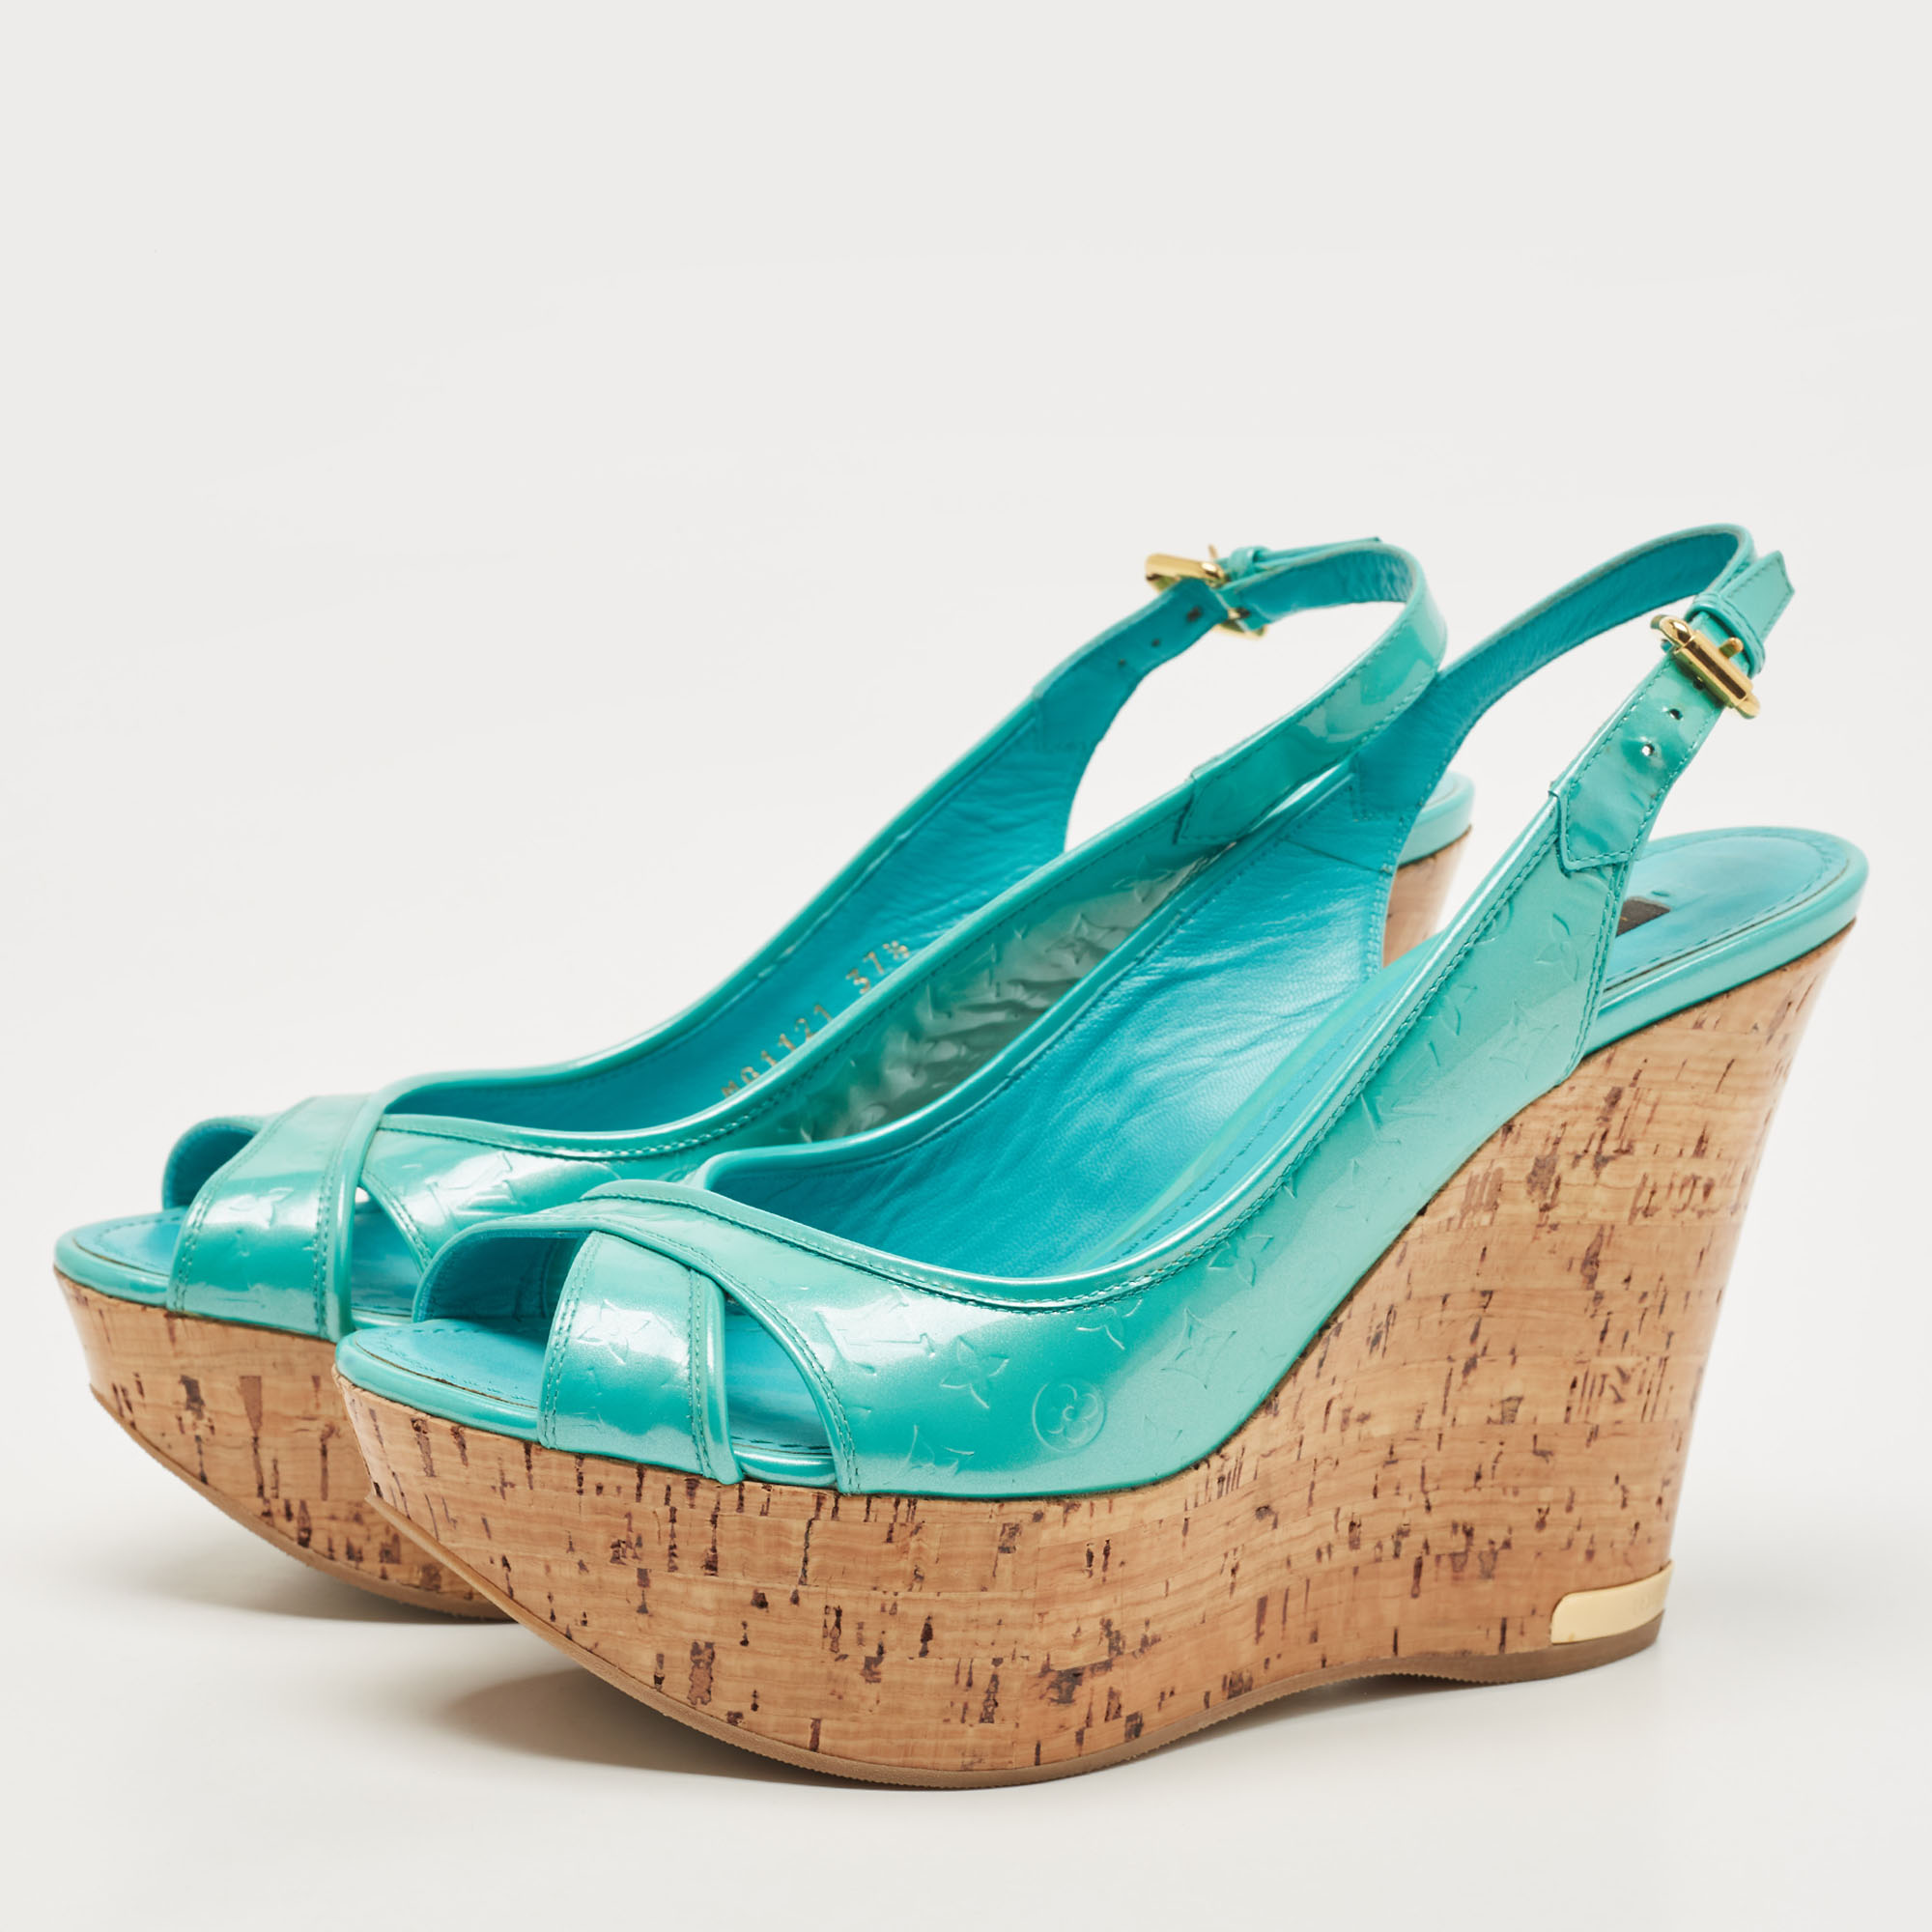   The Luxury Closet Louis Vuitton Turquoise Monogram Embossed Patent Leather Cork Wedge Slingback Sandals Size 37.5